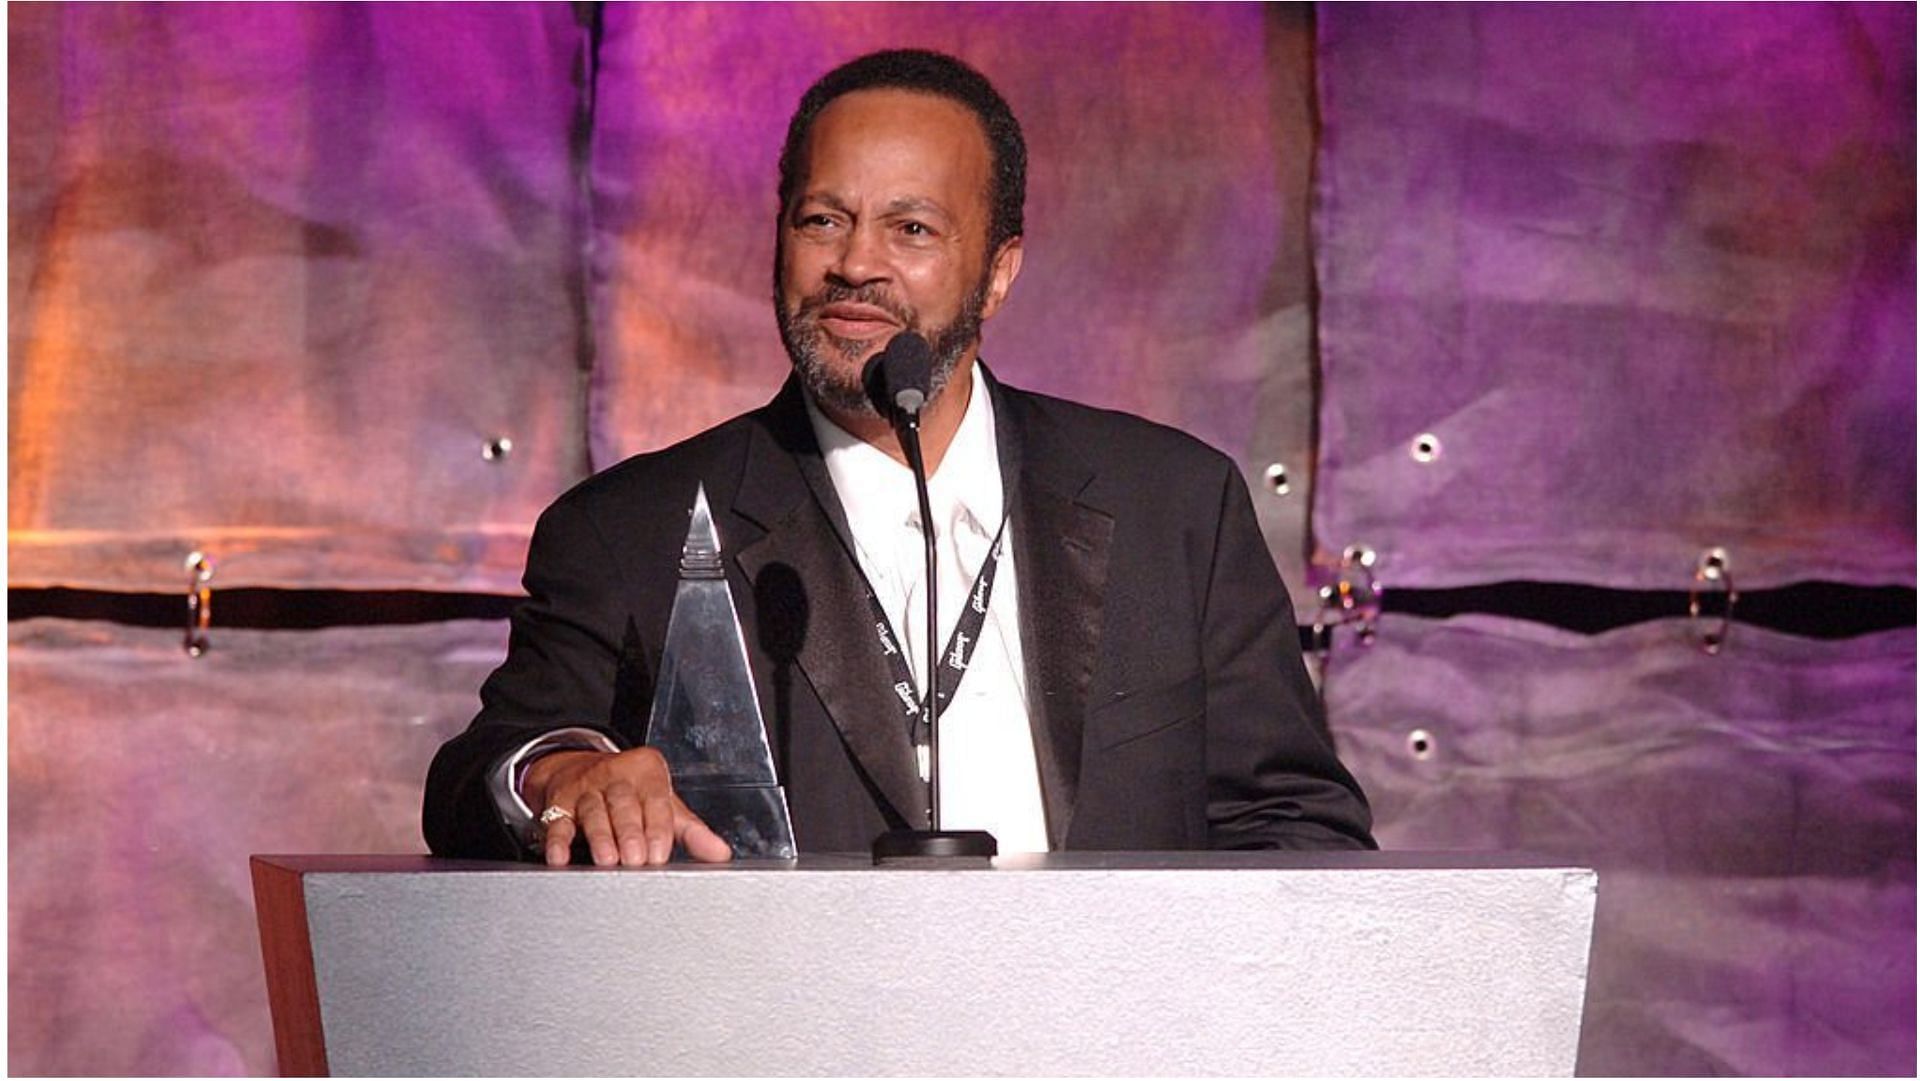 Thom Bell recently died at the age of 78 (Image via Stephen Lovekin/Getty Images)